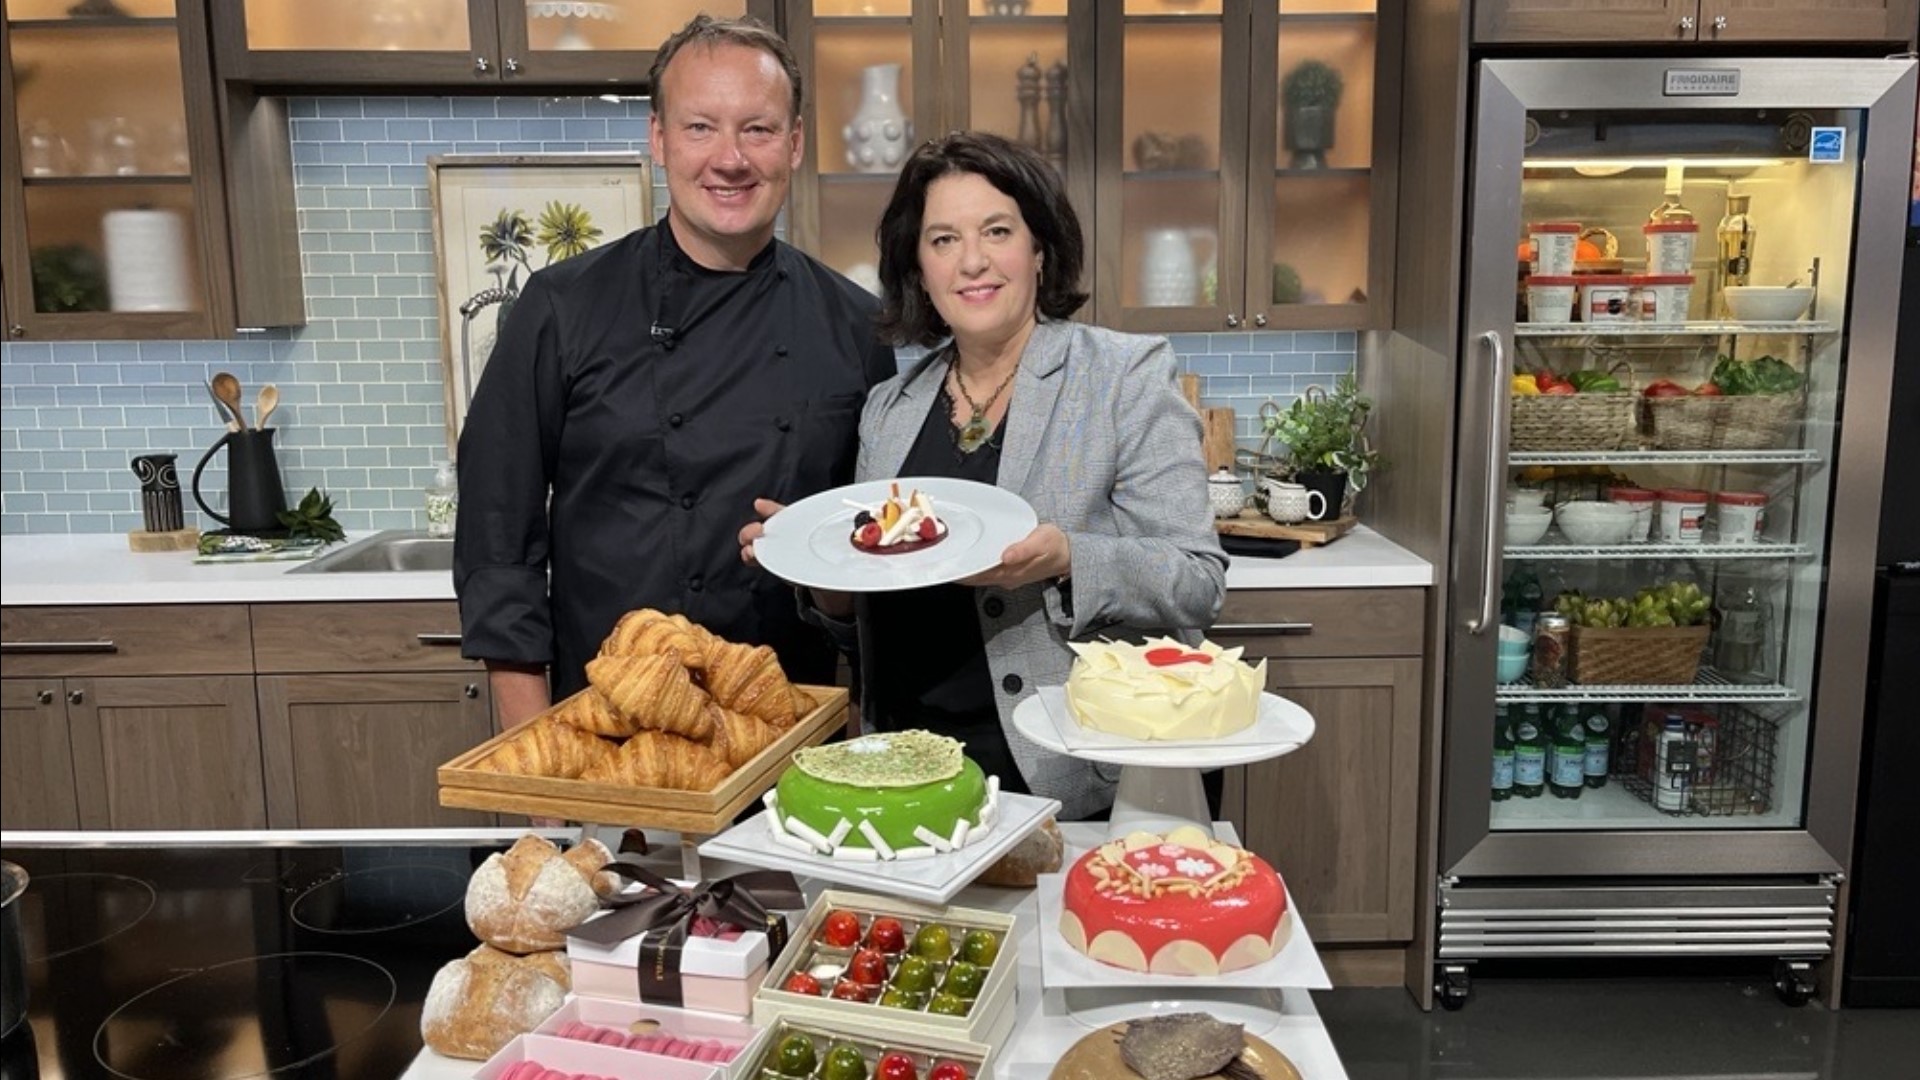 Chef Artis from Charlotte Restaurant and Lounge visits New Day NW to share their award winning pastries and Pavlova recipe.